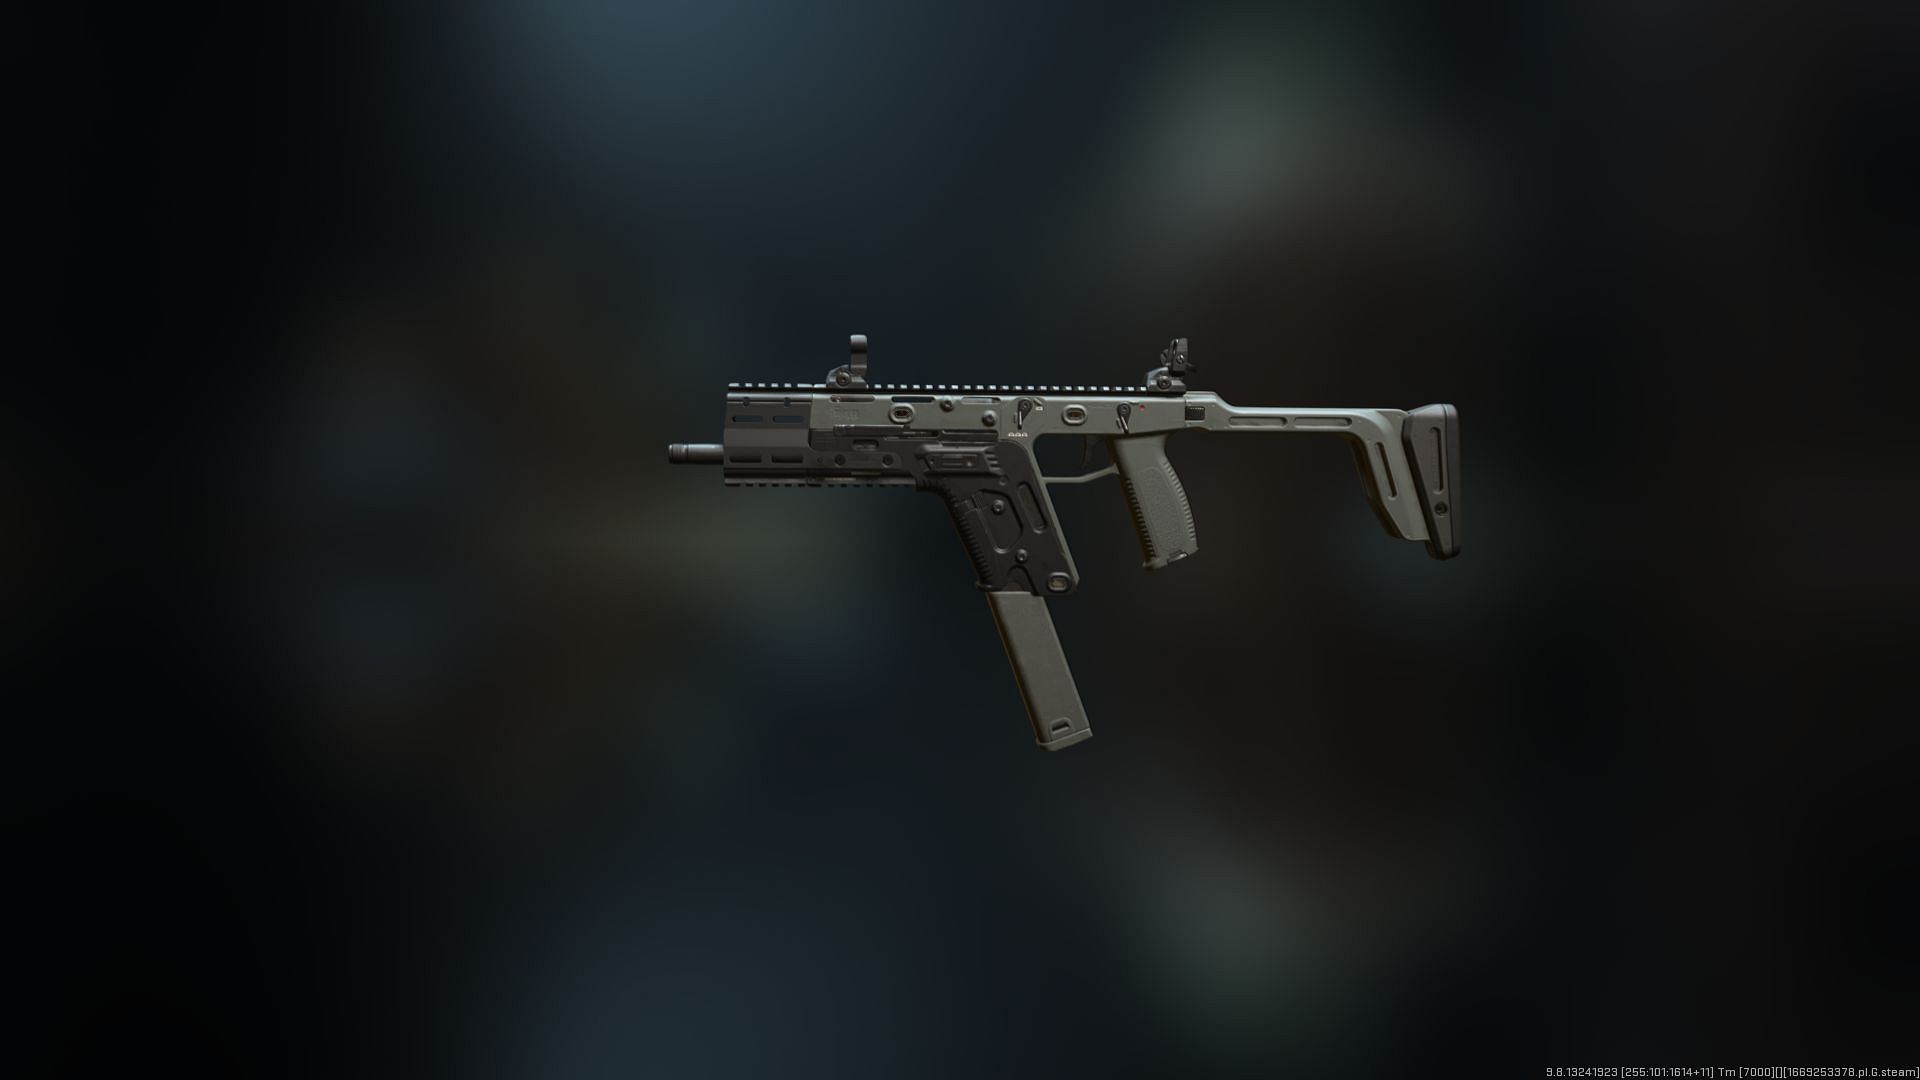 The Fennec 45 SMG in Modern Warfare 2 and Warzone 2 (Image via Activision)